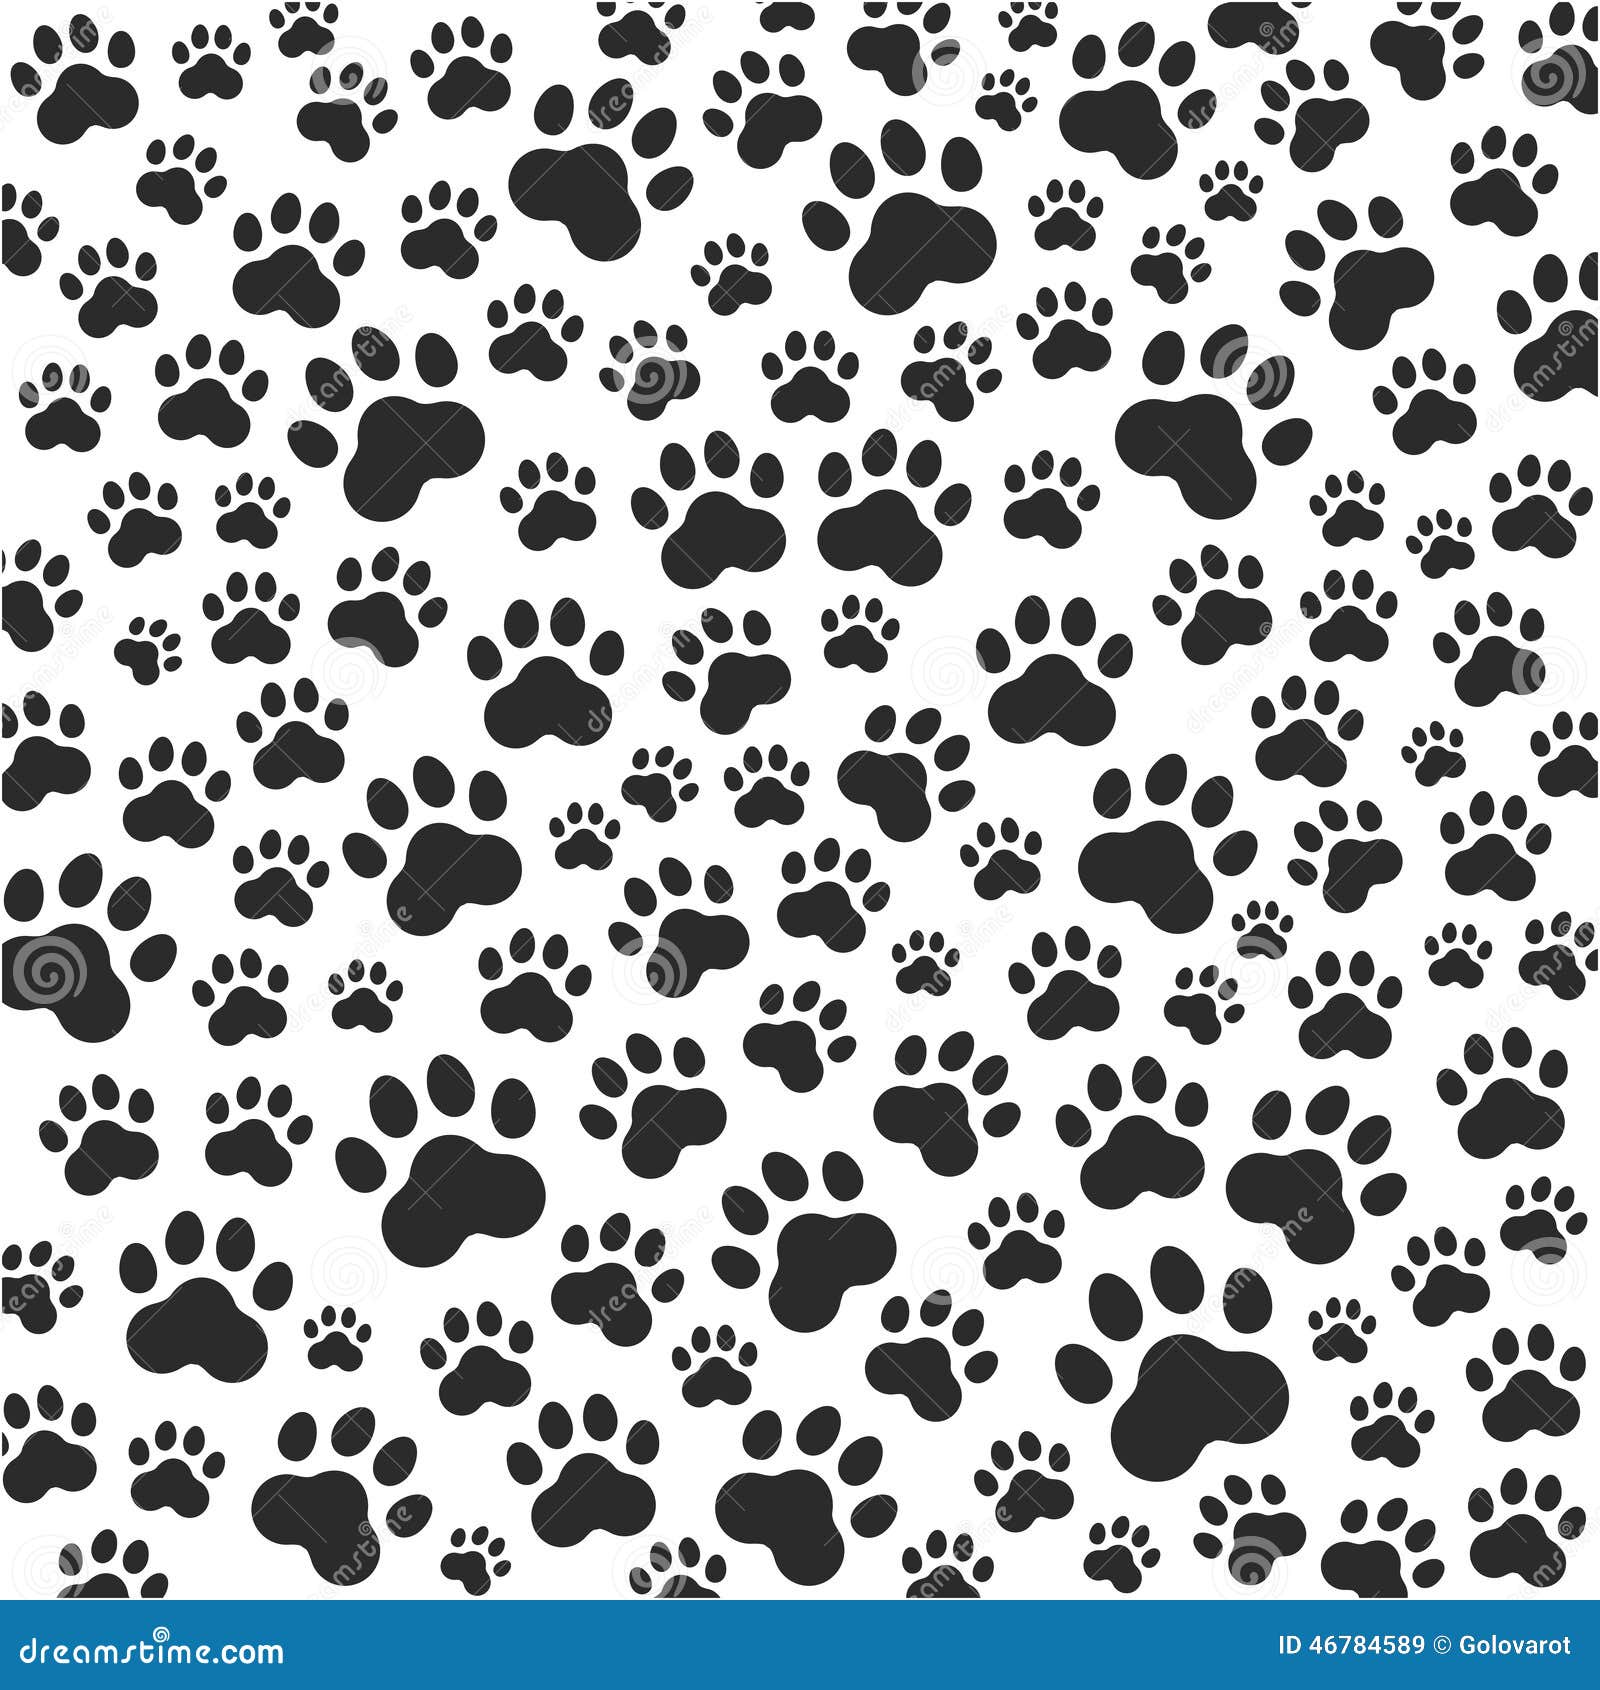 cat or dog paws background. 